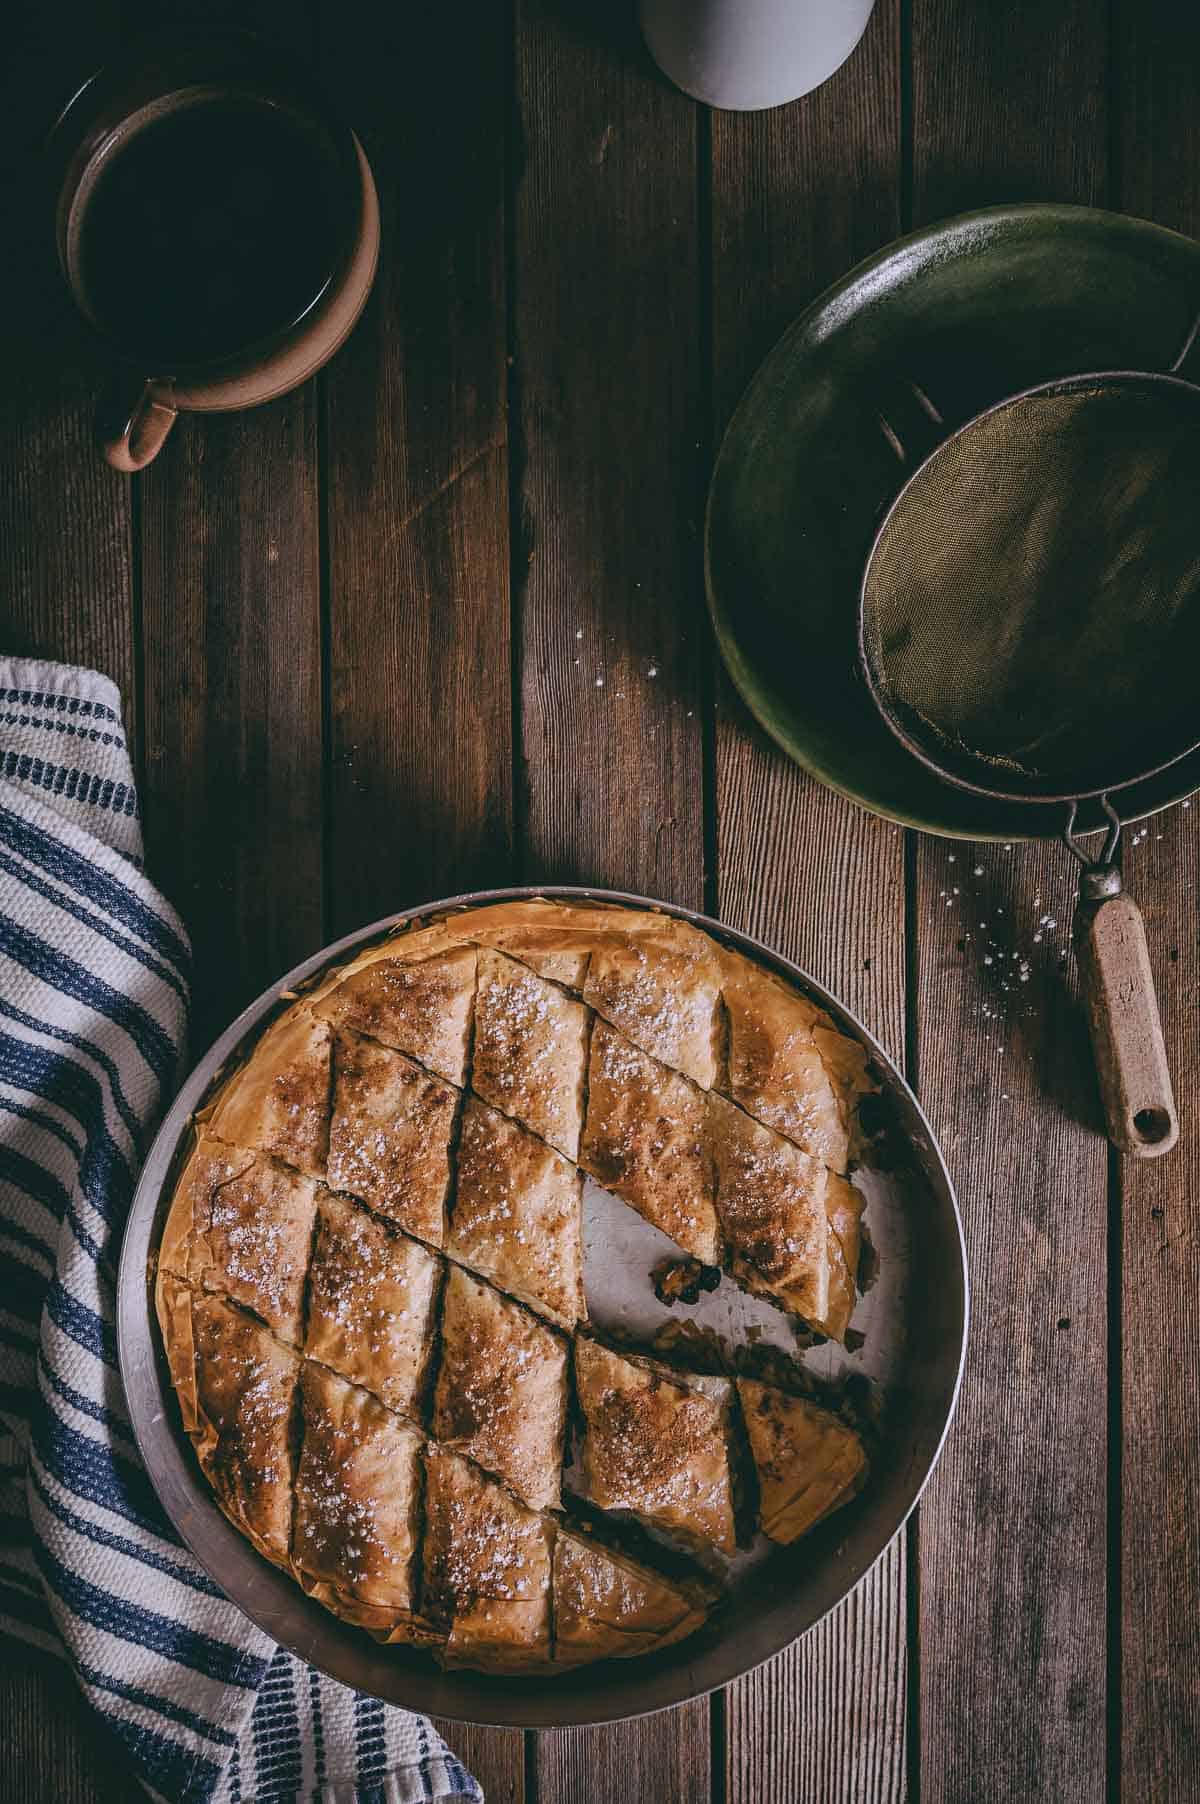 a filo pie on a wooden table with a kitchen towel and a cup of coffee.